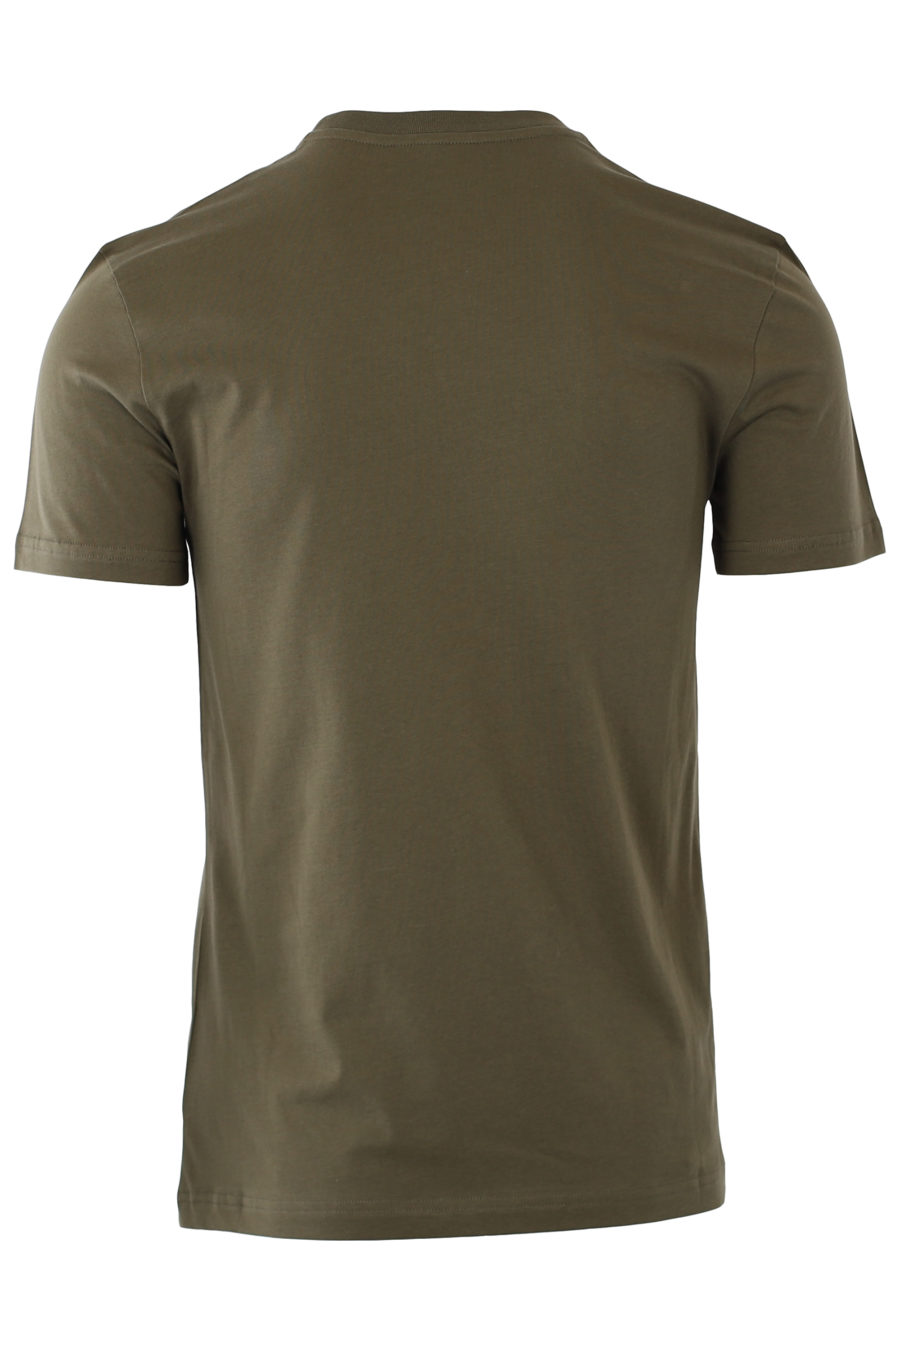 Military green T-shirt with monochrome double question logo - IMG 9320